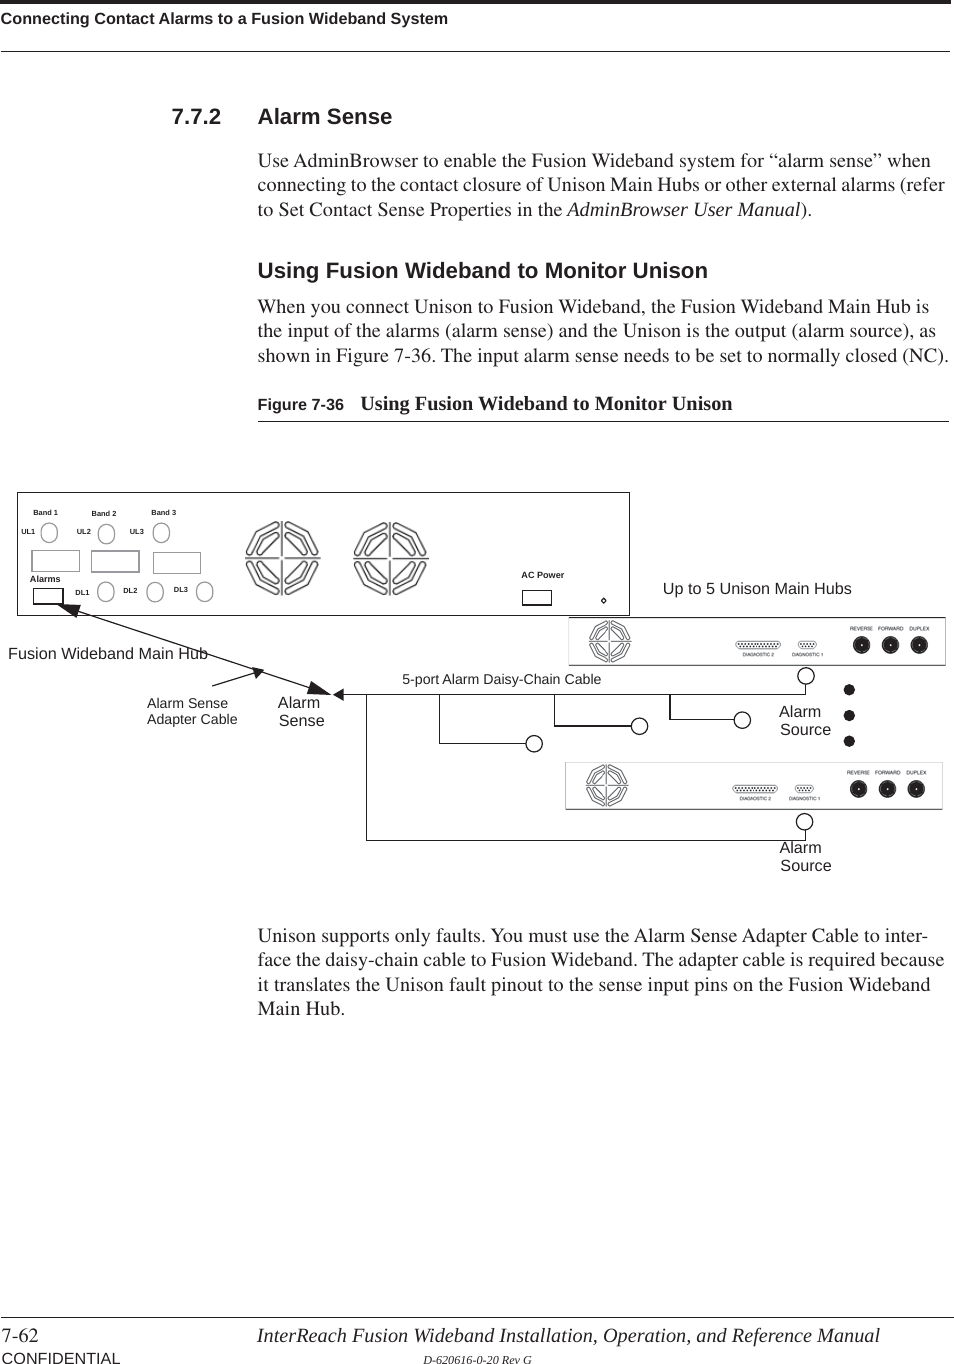 Connecting Contact Alarms to a Fusion Wideband System7-62 InterReach Fusion Wideband Installation, Operation, and Reference Manual CONFIDENTIAL D-620616-0-20 Rev G7.7.2 Alarm SenseUse AdminBrowser to enable the Fusion Wideband system for “alarm sense” when connecting to the contact closure of Unison Main Hubs or other external alarms (refer to Set Contact Sense Properties in the AdminBrowser User Manual).Using Fusion Wideband to Monitor UnisonWhen you connect Unison to Fusion Wideband, the Fusion Wideband Main Hub is the input of the alarms (alarm sense) and the Unison is the output (alarm source), as shown in Figure  7-36. The input alarm sense needs to be set to normally closed (NC).Figure 7-36 Using Fusion Wideband to Monitor UnisonUp to 5 Unison Main HubsFusion Wideband Main HubAlarmSourceAlarmSense AlarmSourceAlarm SenseAdapter Cable5-port Alarm Daisy-Chain CableBand 1 Band 2 Band 3UL1 UL2 UL3DL1 DL2 DL3AC PowerAlarmsUnison supports only faults. You must use the Alarm Sense Adapter Cable to inter-face the daisy-chain cable to Fusion Wideband. The adapter cable is required because it translates the Unison fault pinout to the sense input pins on the Fusion Wideband Main Hub.